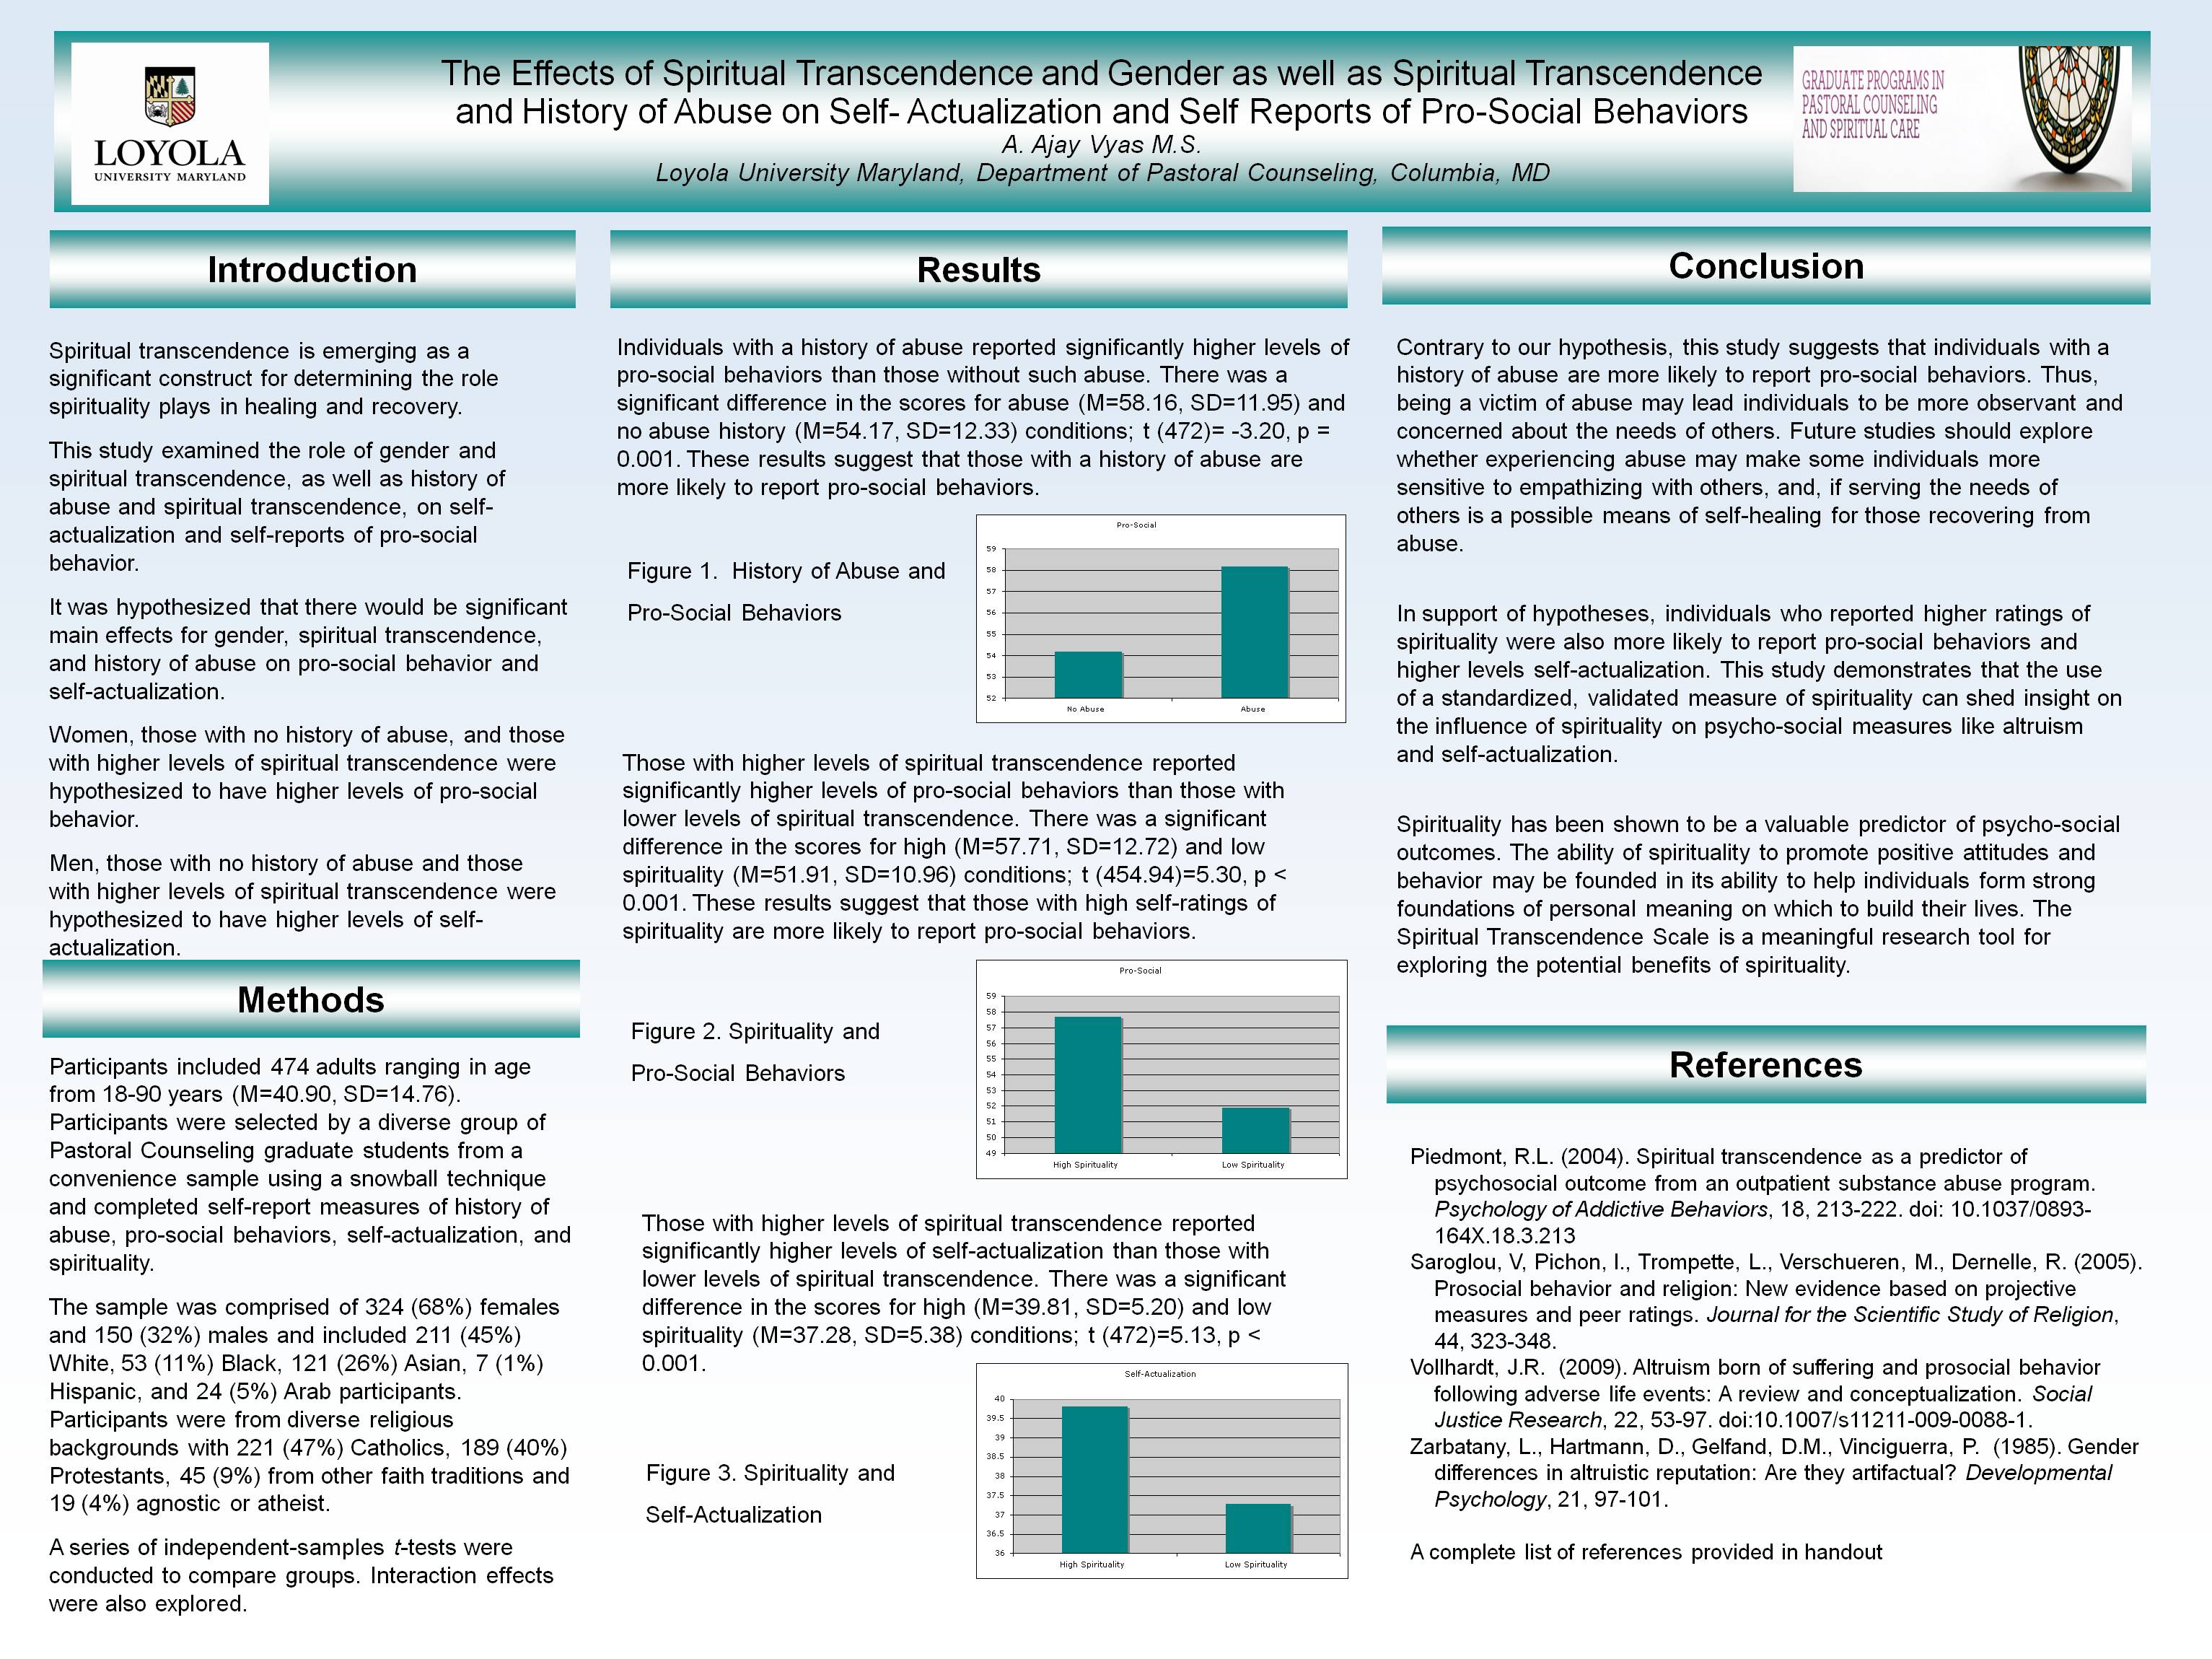 Poster image: Effects of Spiritual Transcendence and Gender as well as Spiritual Transcendence and History of Abuse on Self-Actualization and Self Reports of Pro-Social Behaviors